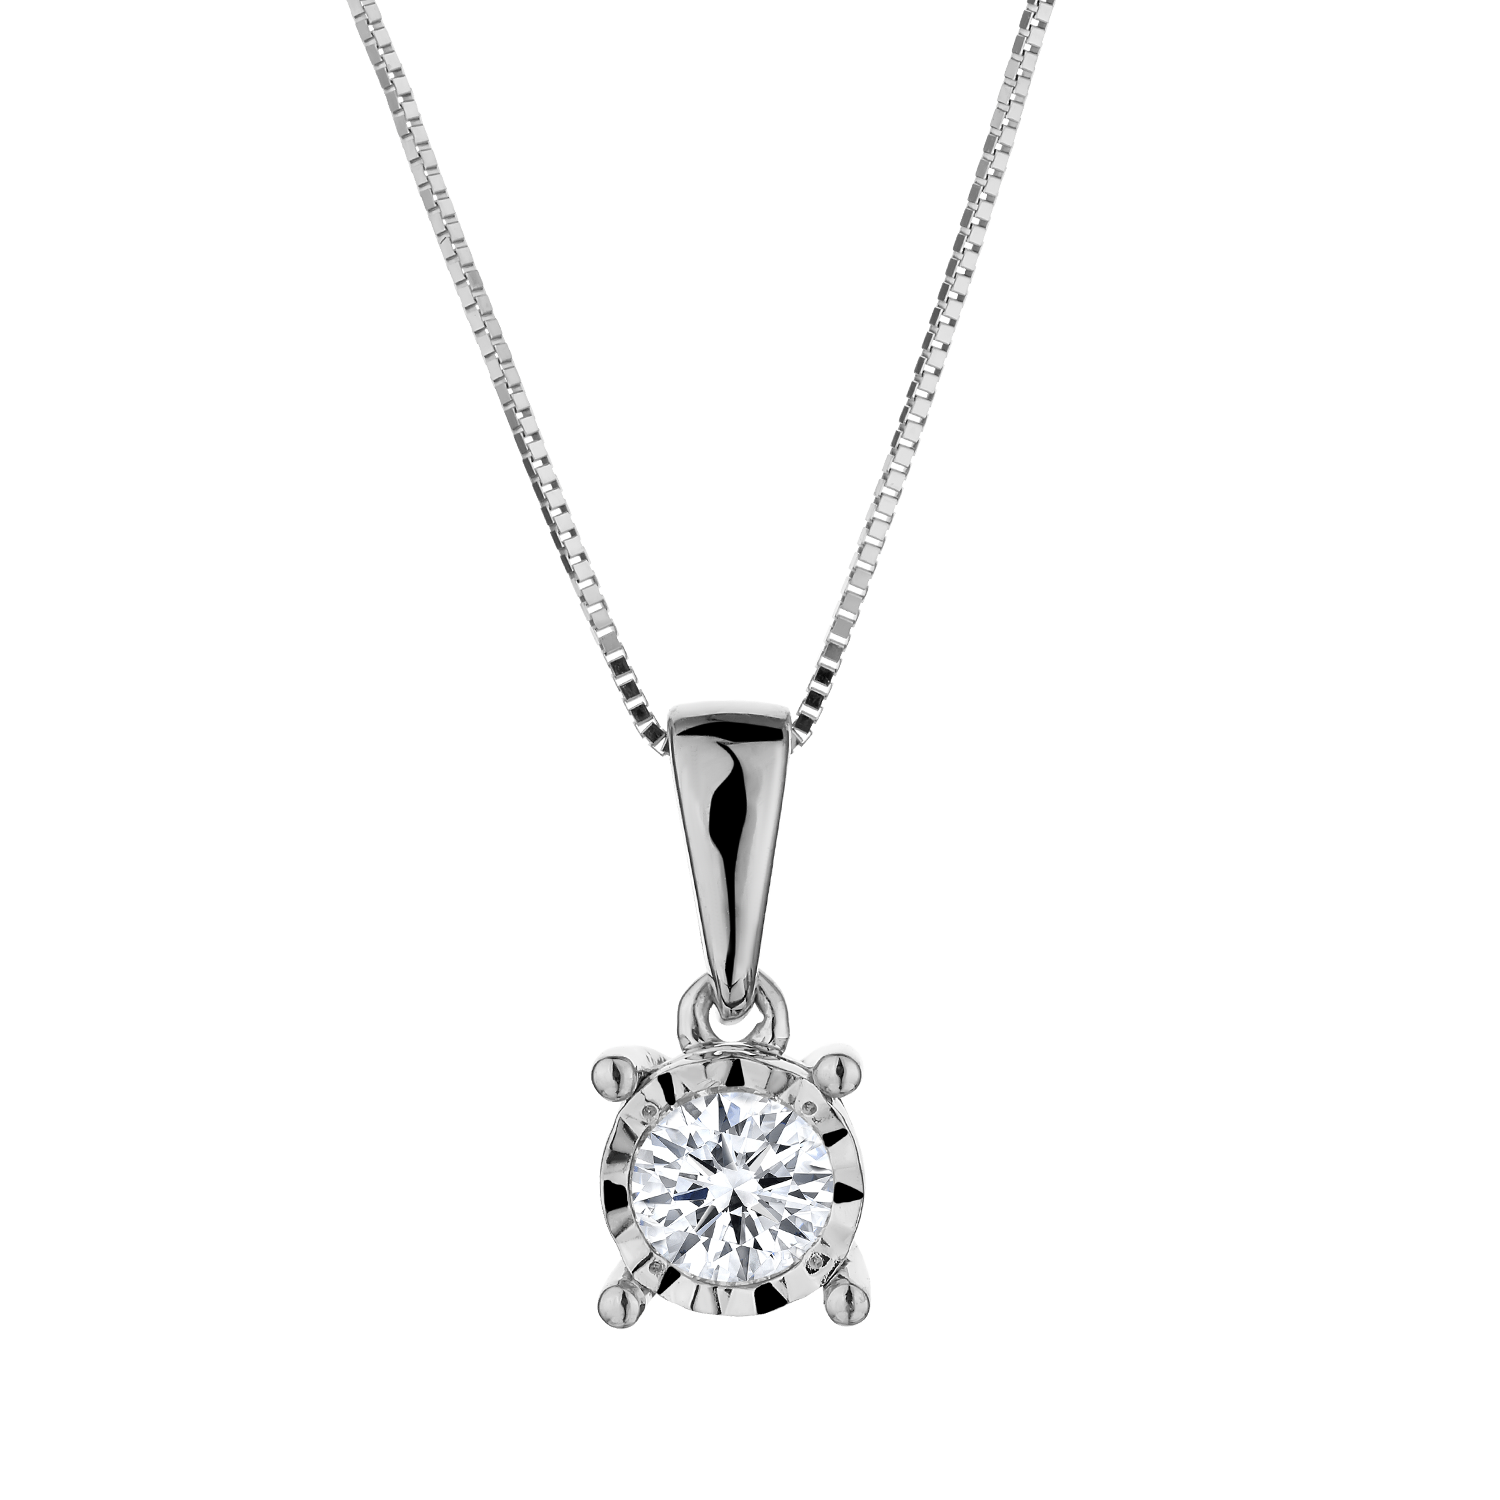 .40 Carat Diamond "Miracle" Pendant,  14kt White Gold. Necklaces and Pendants. Griffin Jewellery Designs. 